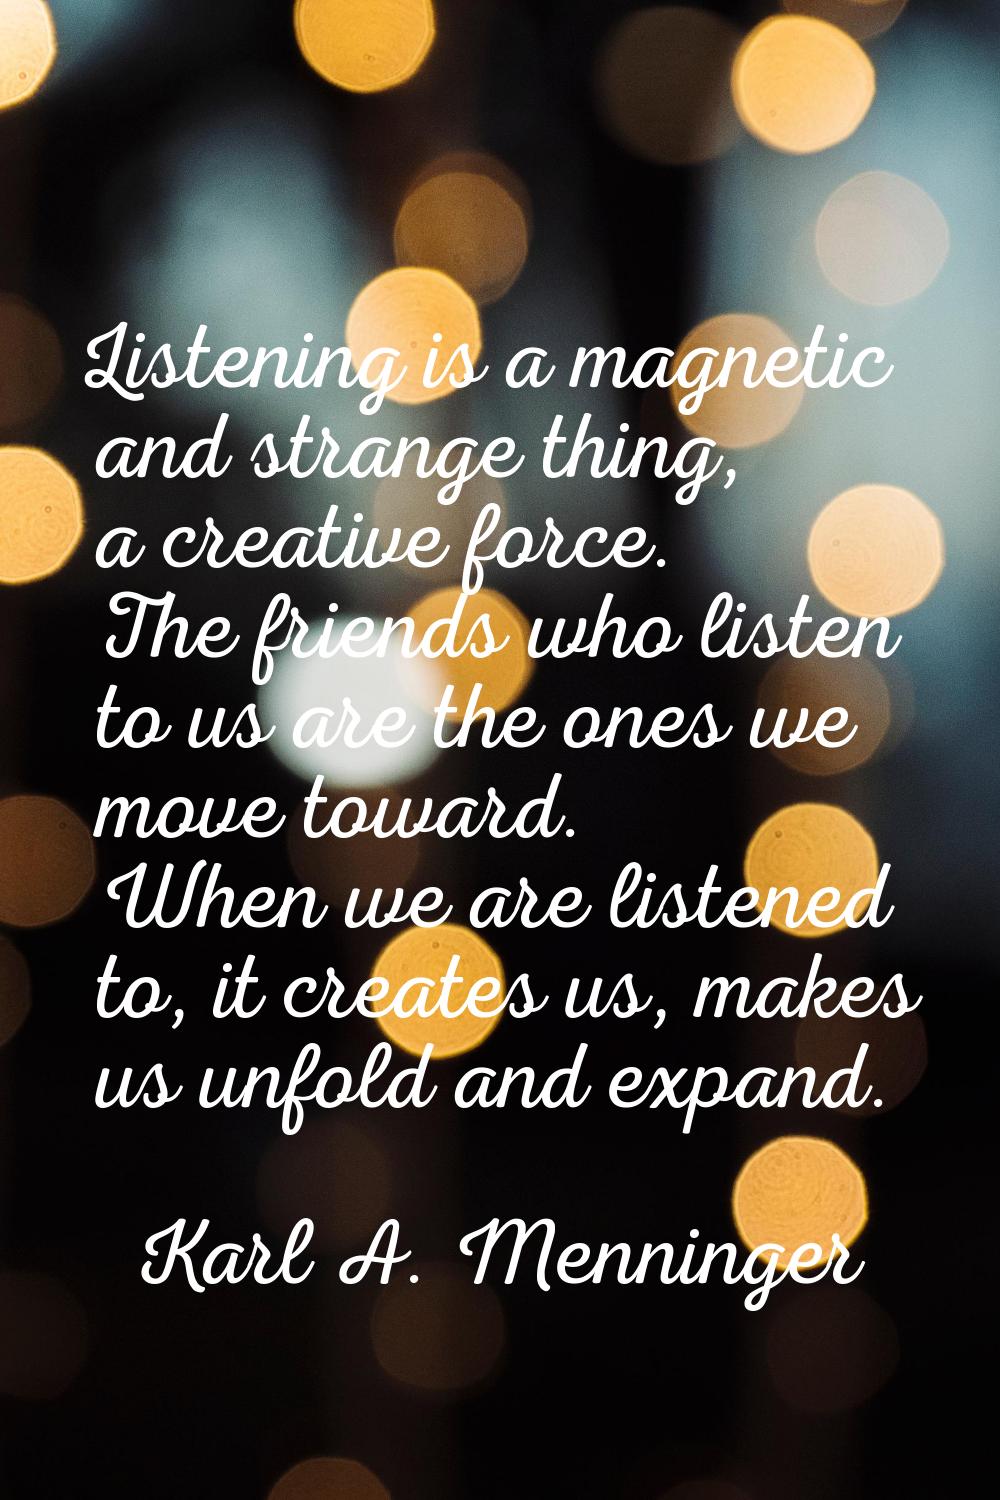 Listening is a magnetic and strange thing, a creative force. The friends who listen to us are the o